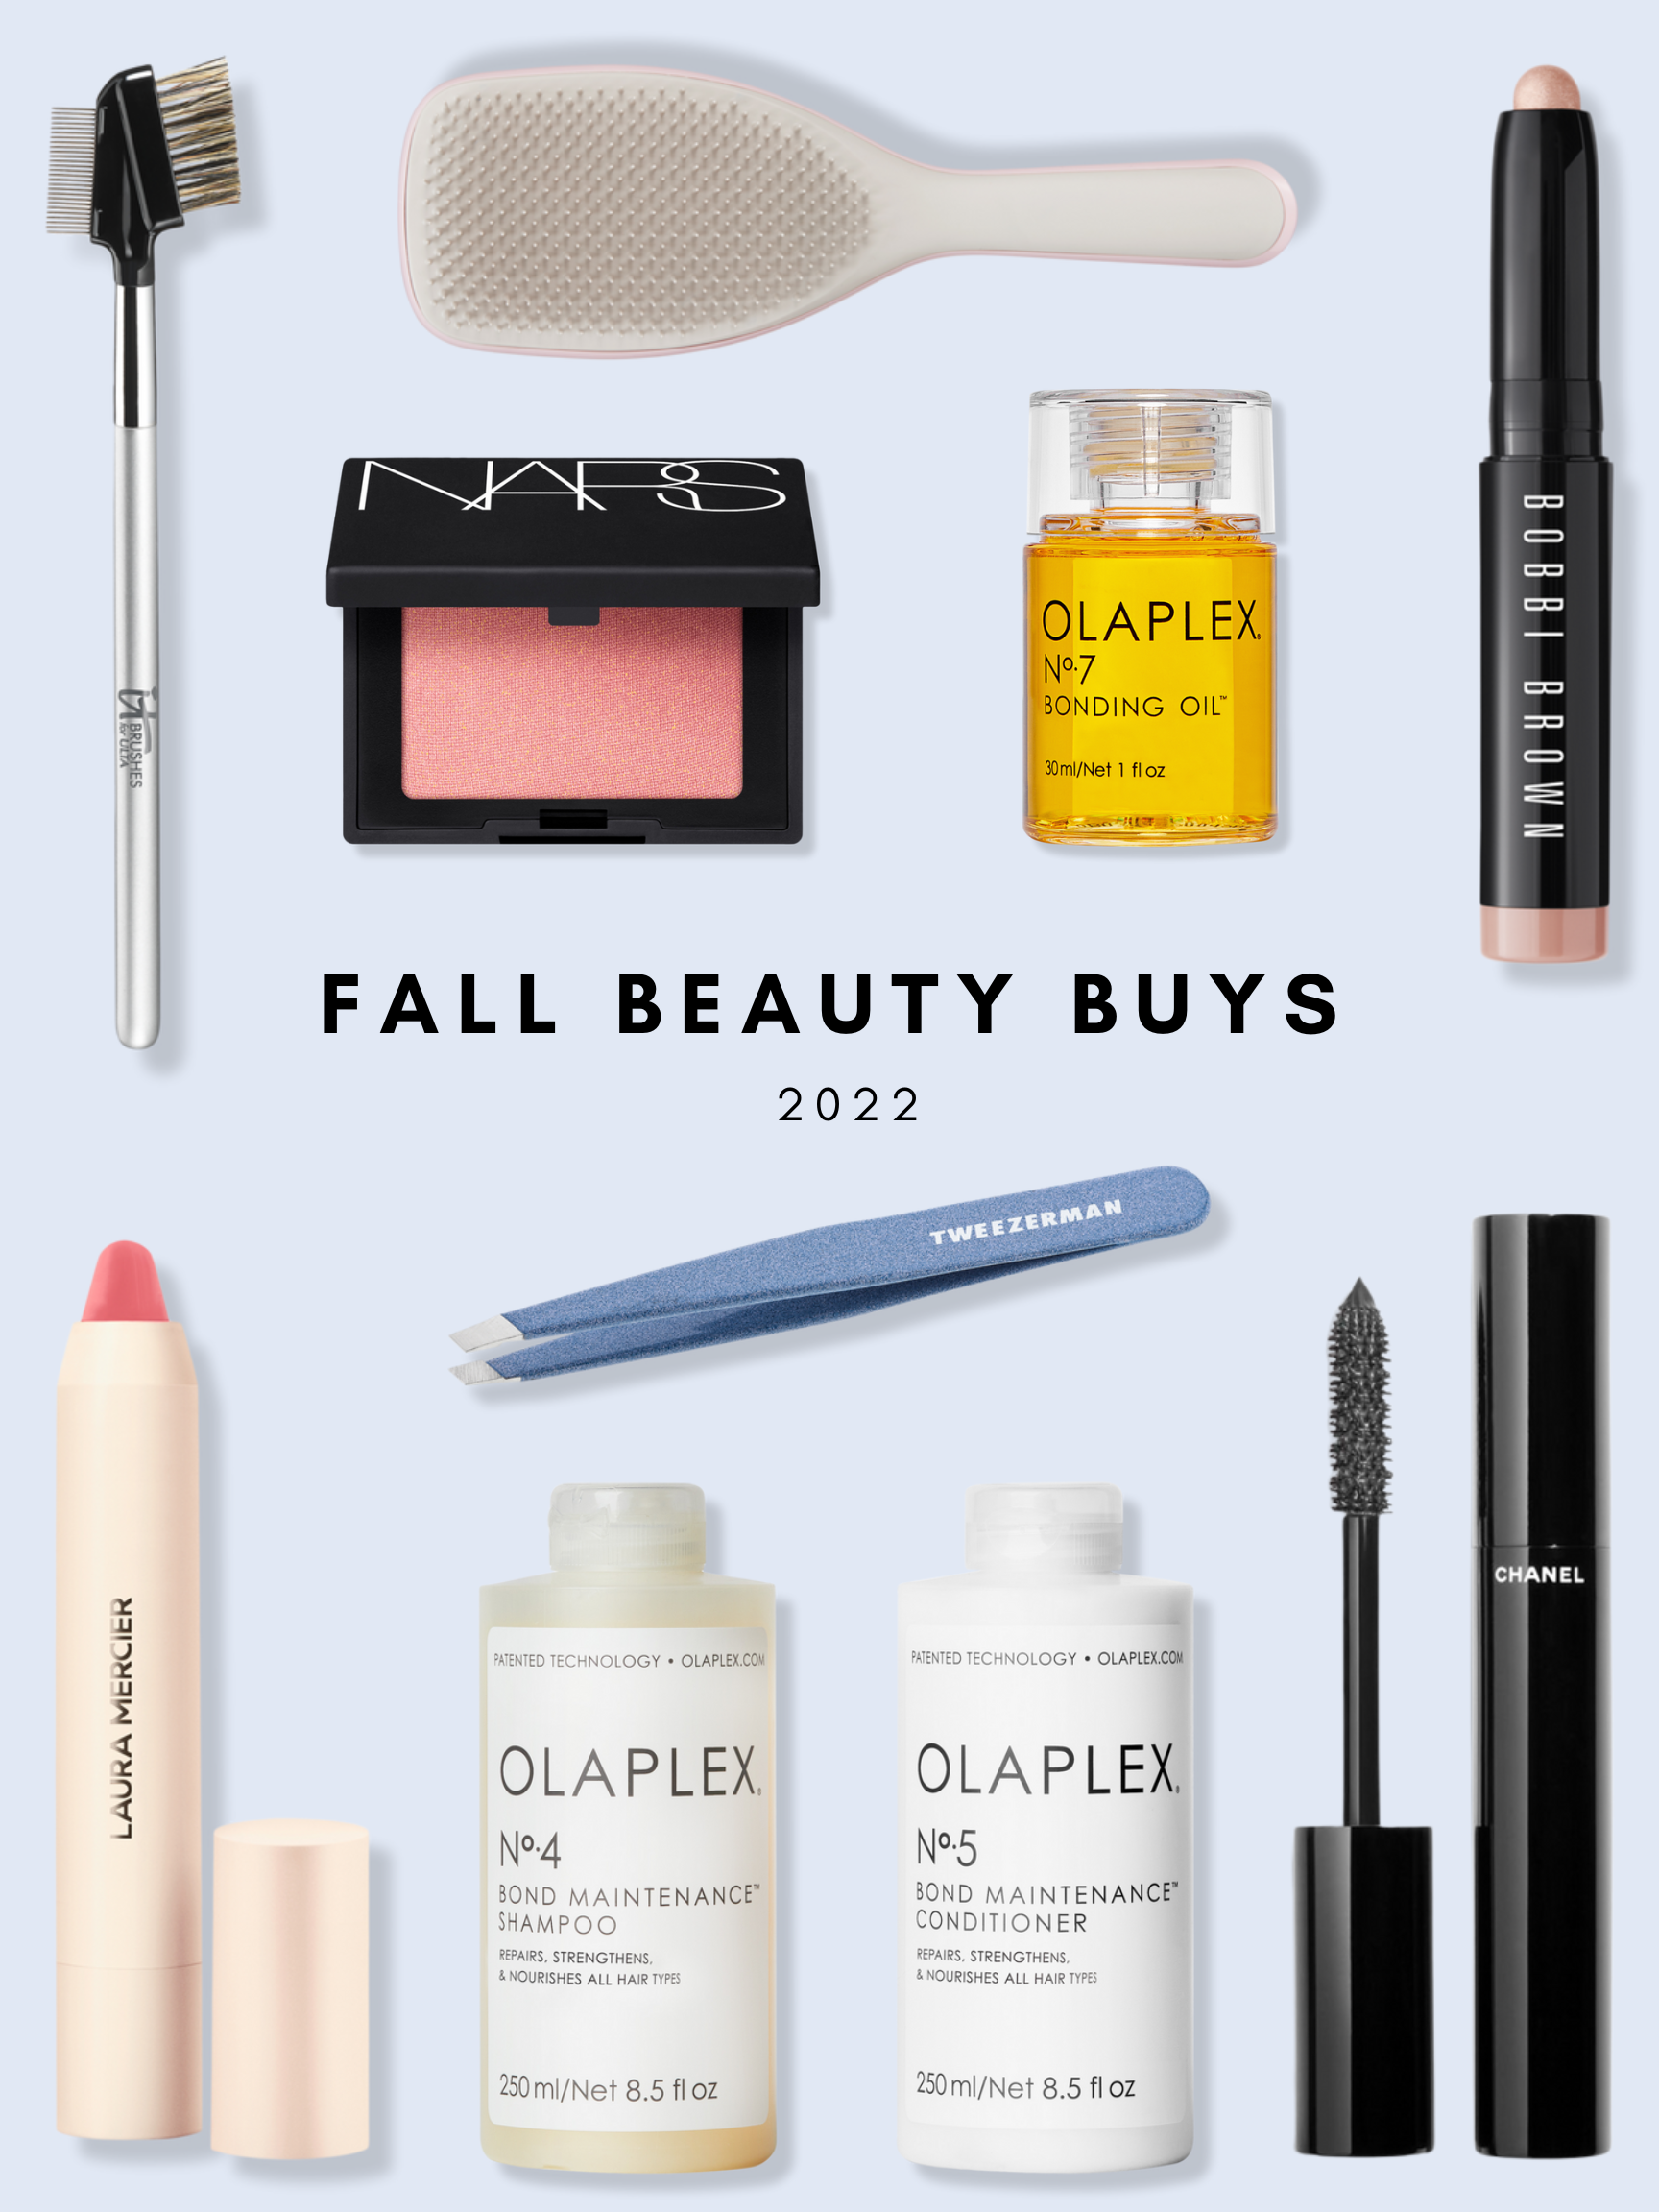 Desiree Leone of Beautifully Seaside features my Ulta Beauty fall must-haves